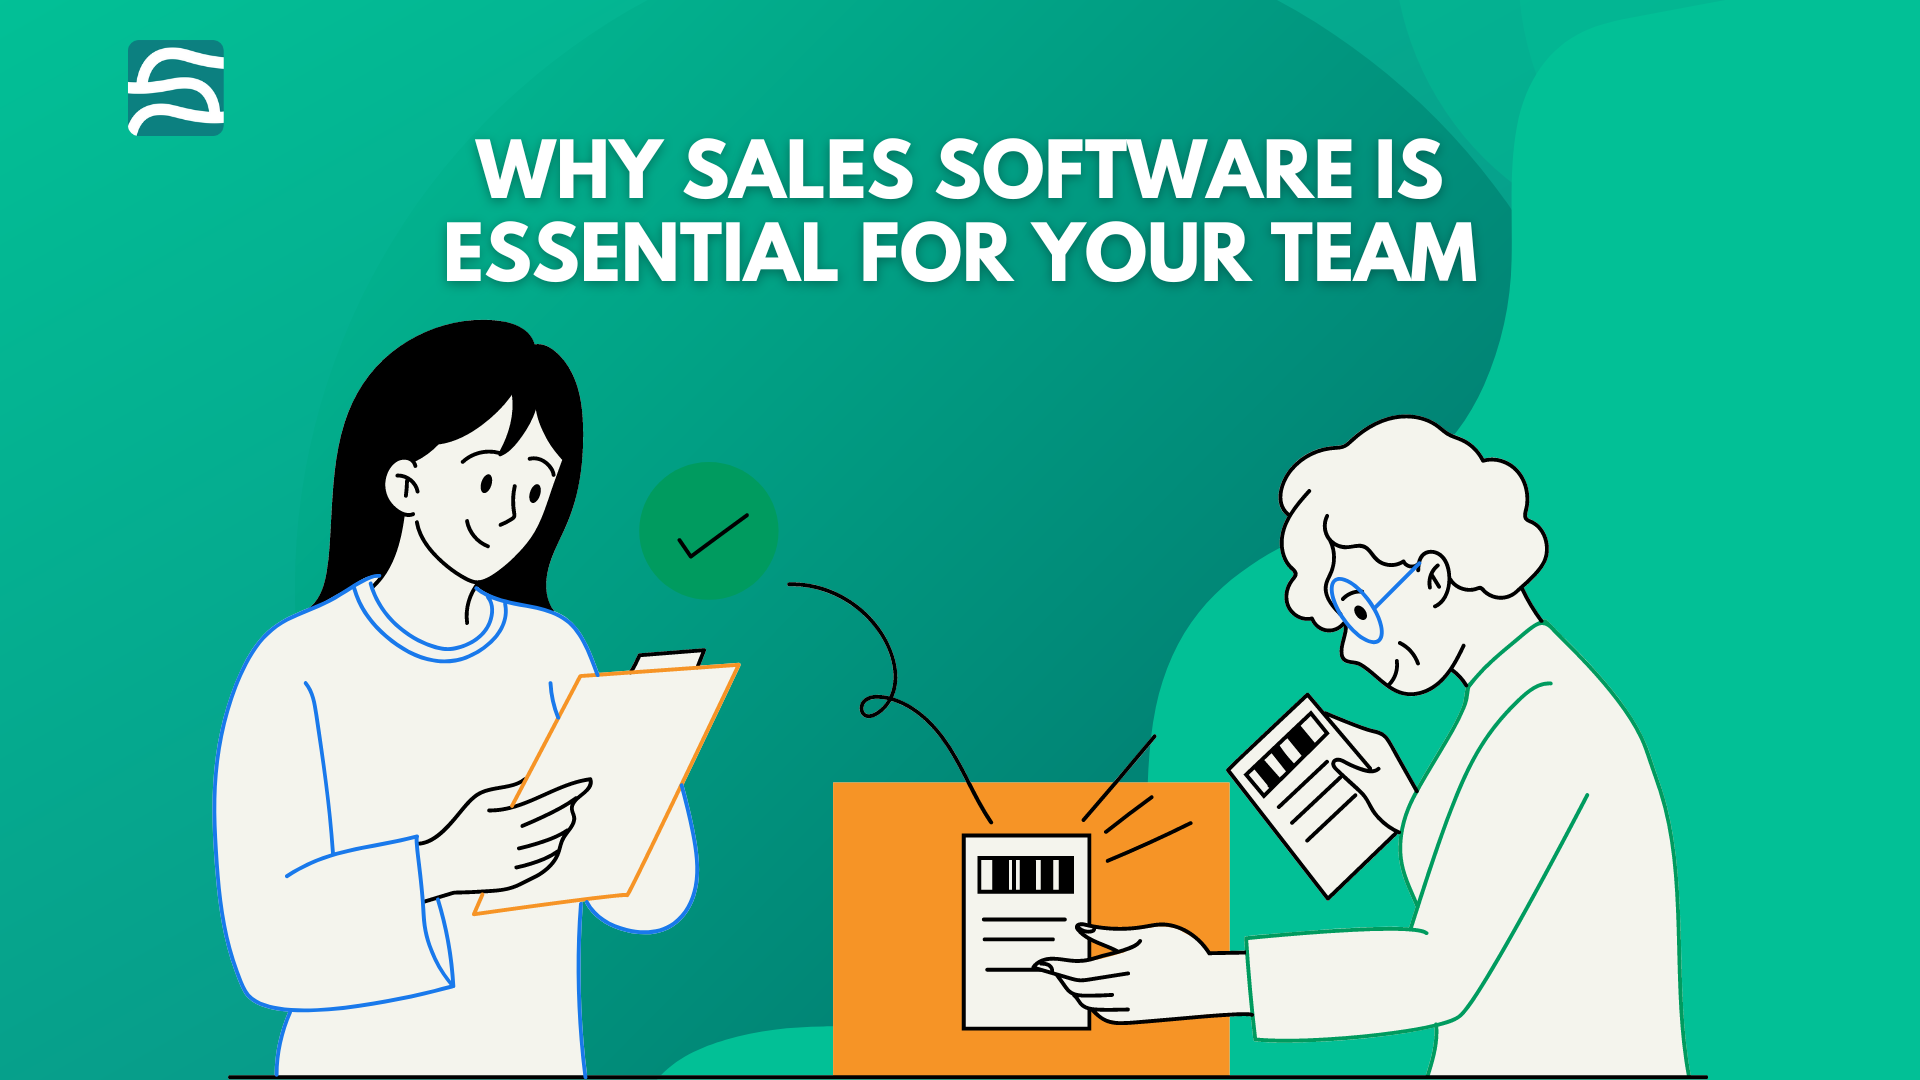 sales software: Why Sales Software is Essential for Your Team